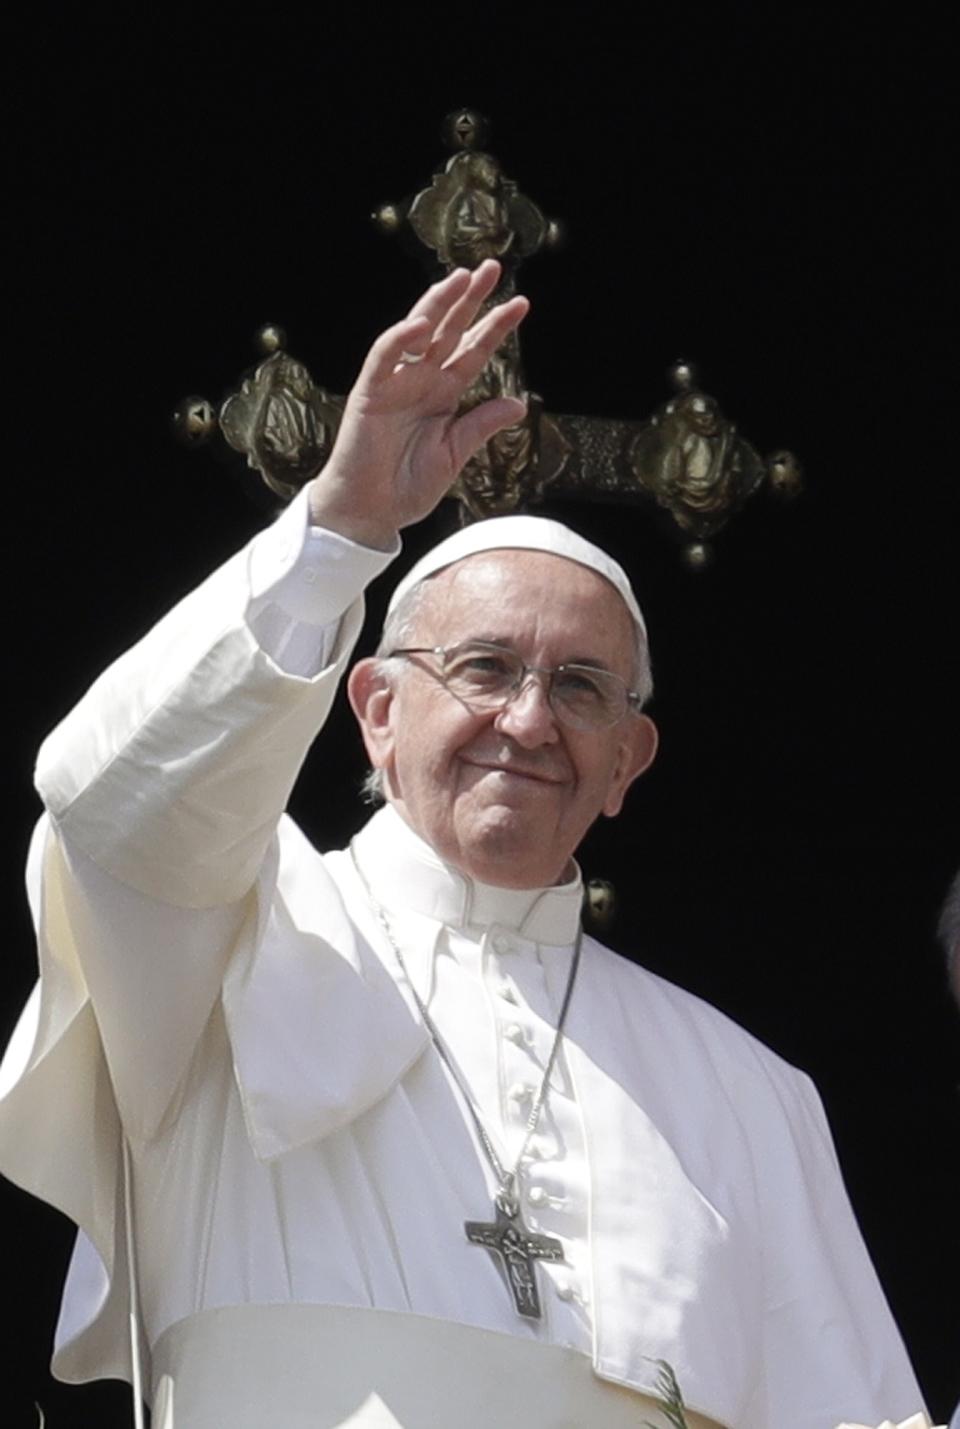 Pope Francis waves after celebrating Easter Sunday Mass, from the main balcony of in St. Peter's Basilica, at the Vatican, Sunday, April 16, 2017. (AP Photo/Gregorio Borgia)